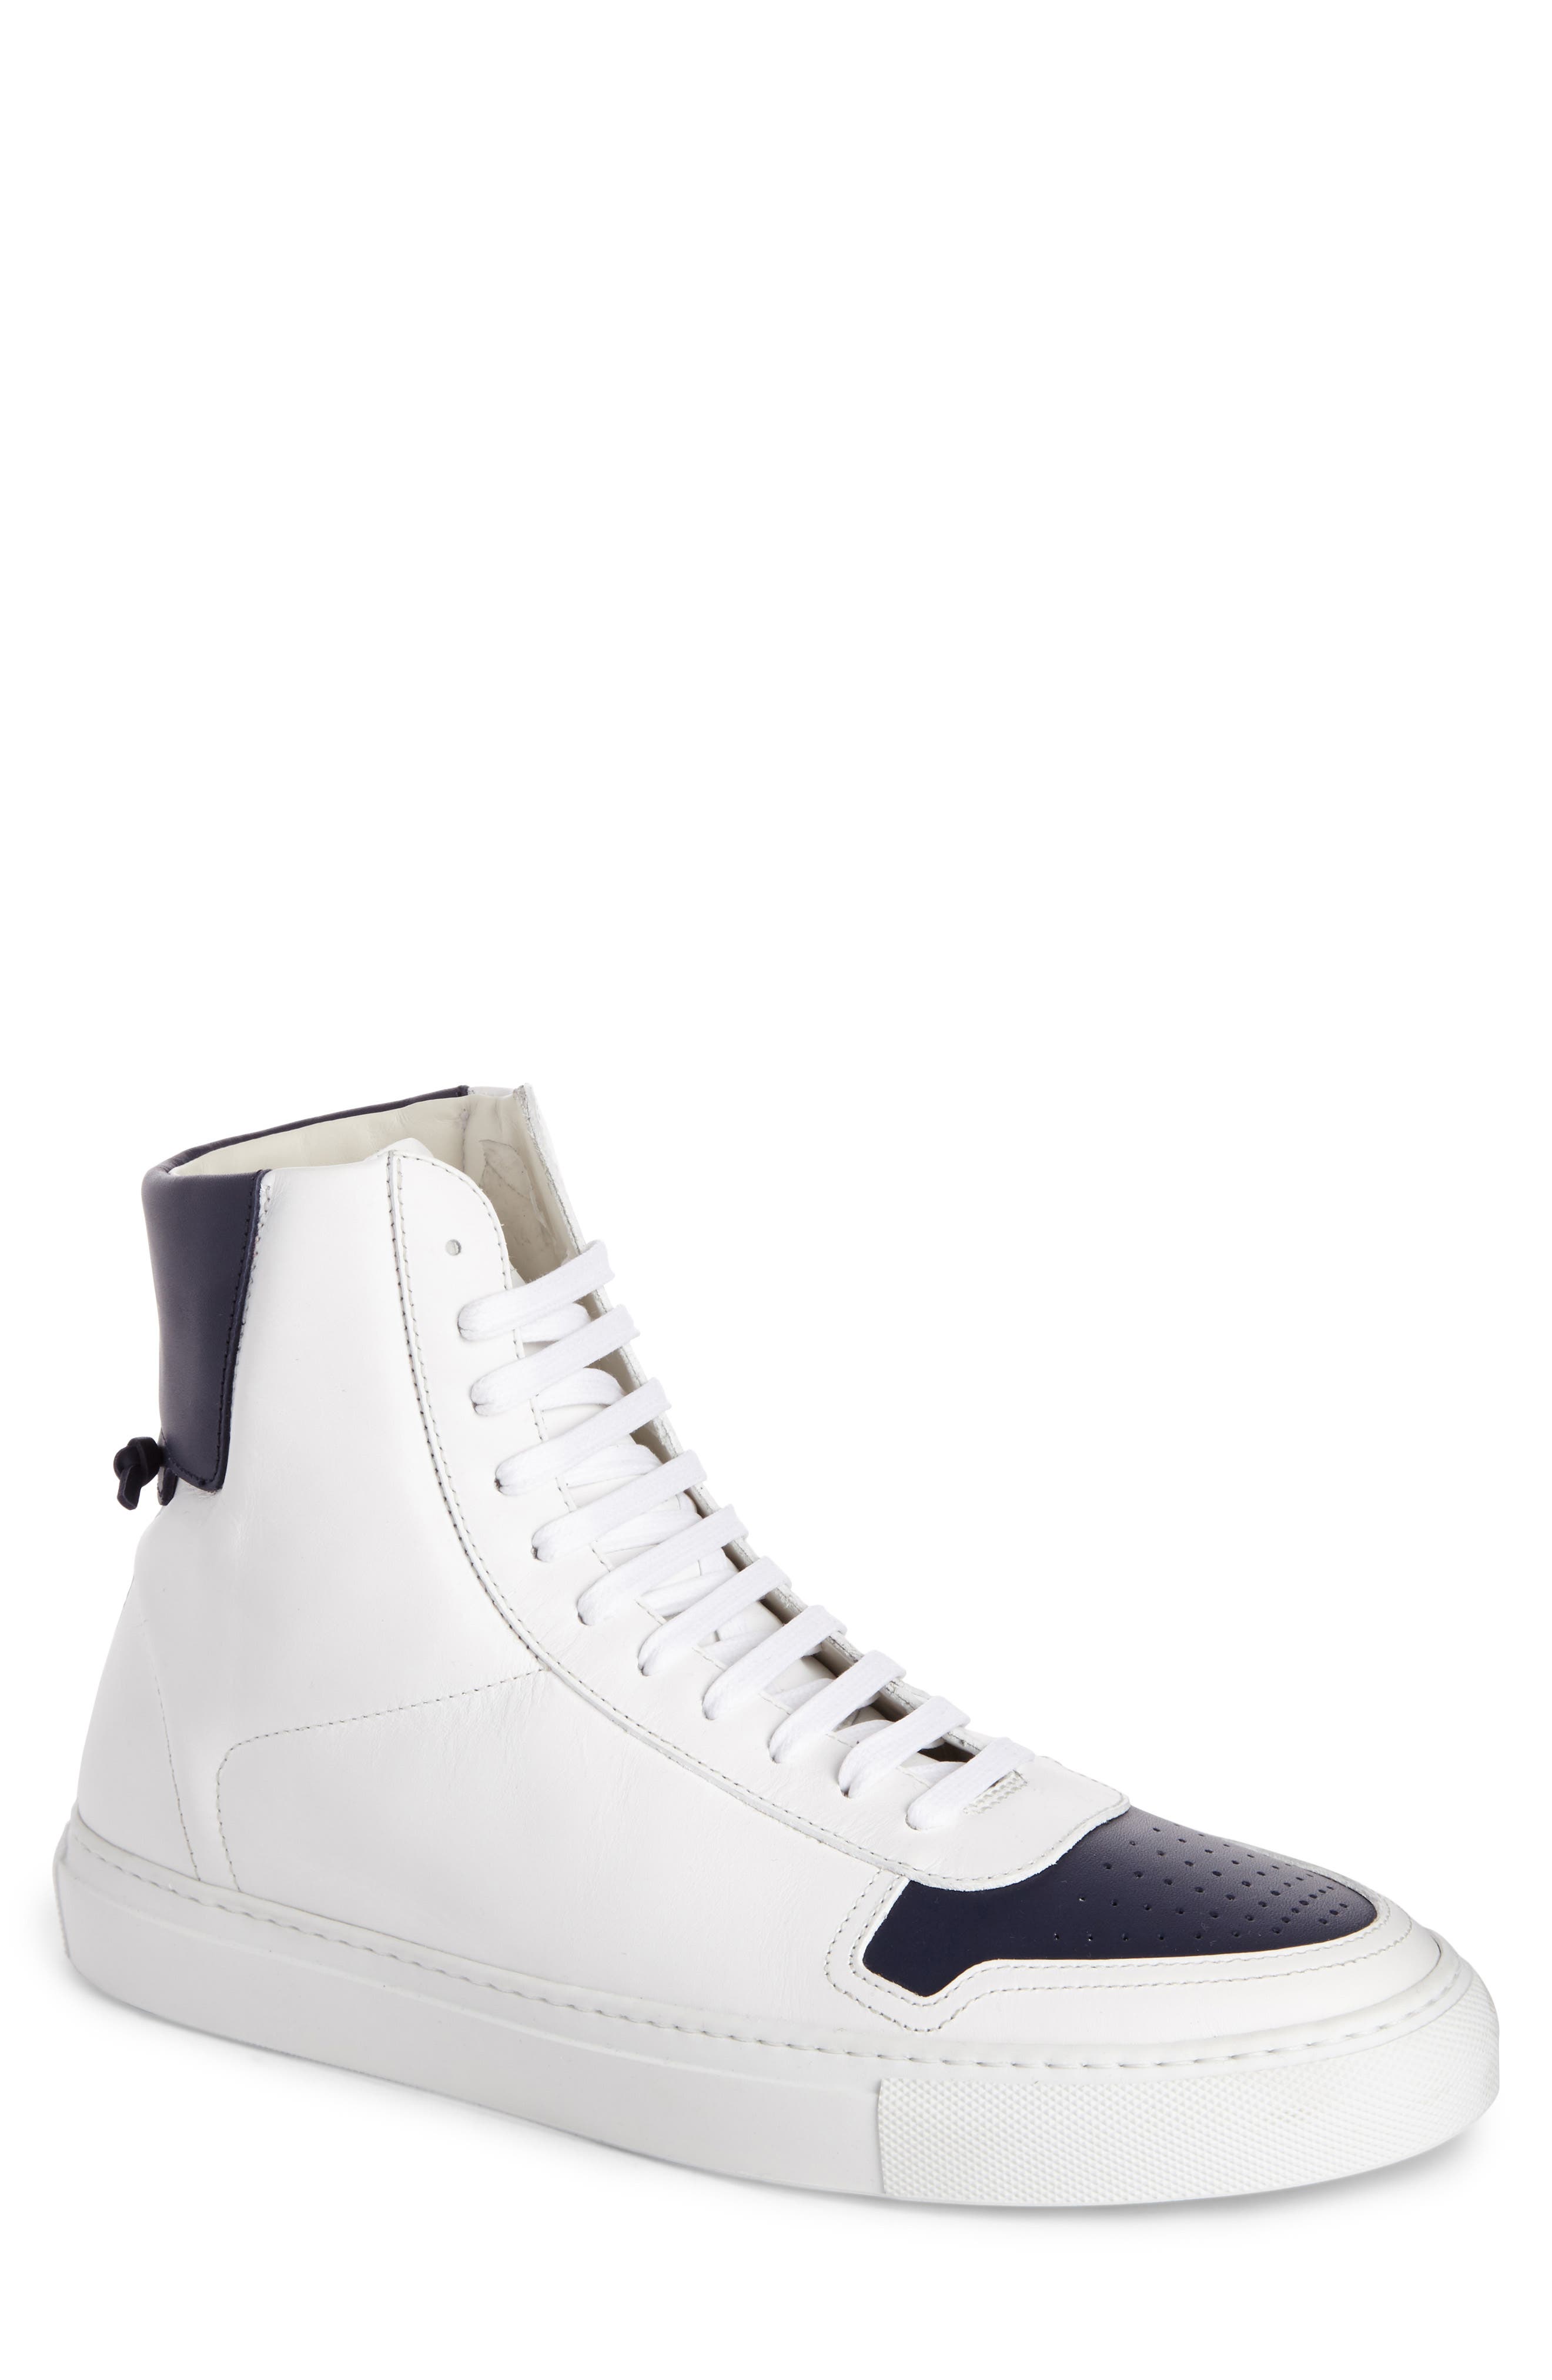 givenchy white high top sneakers